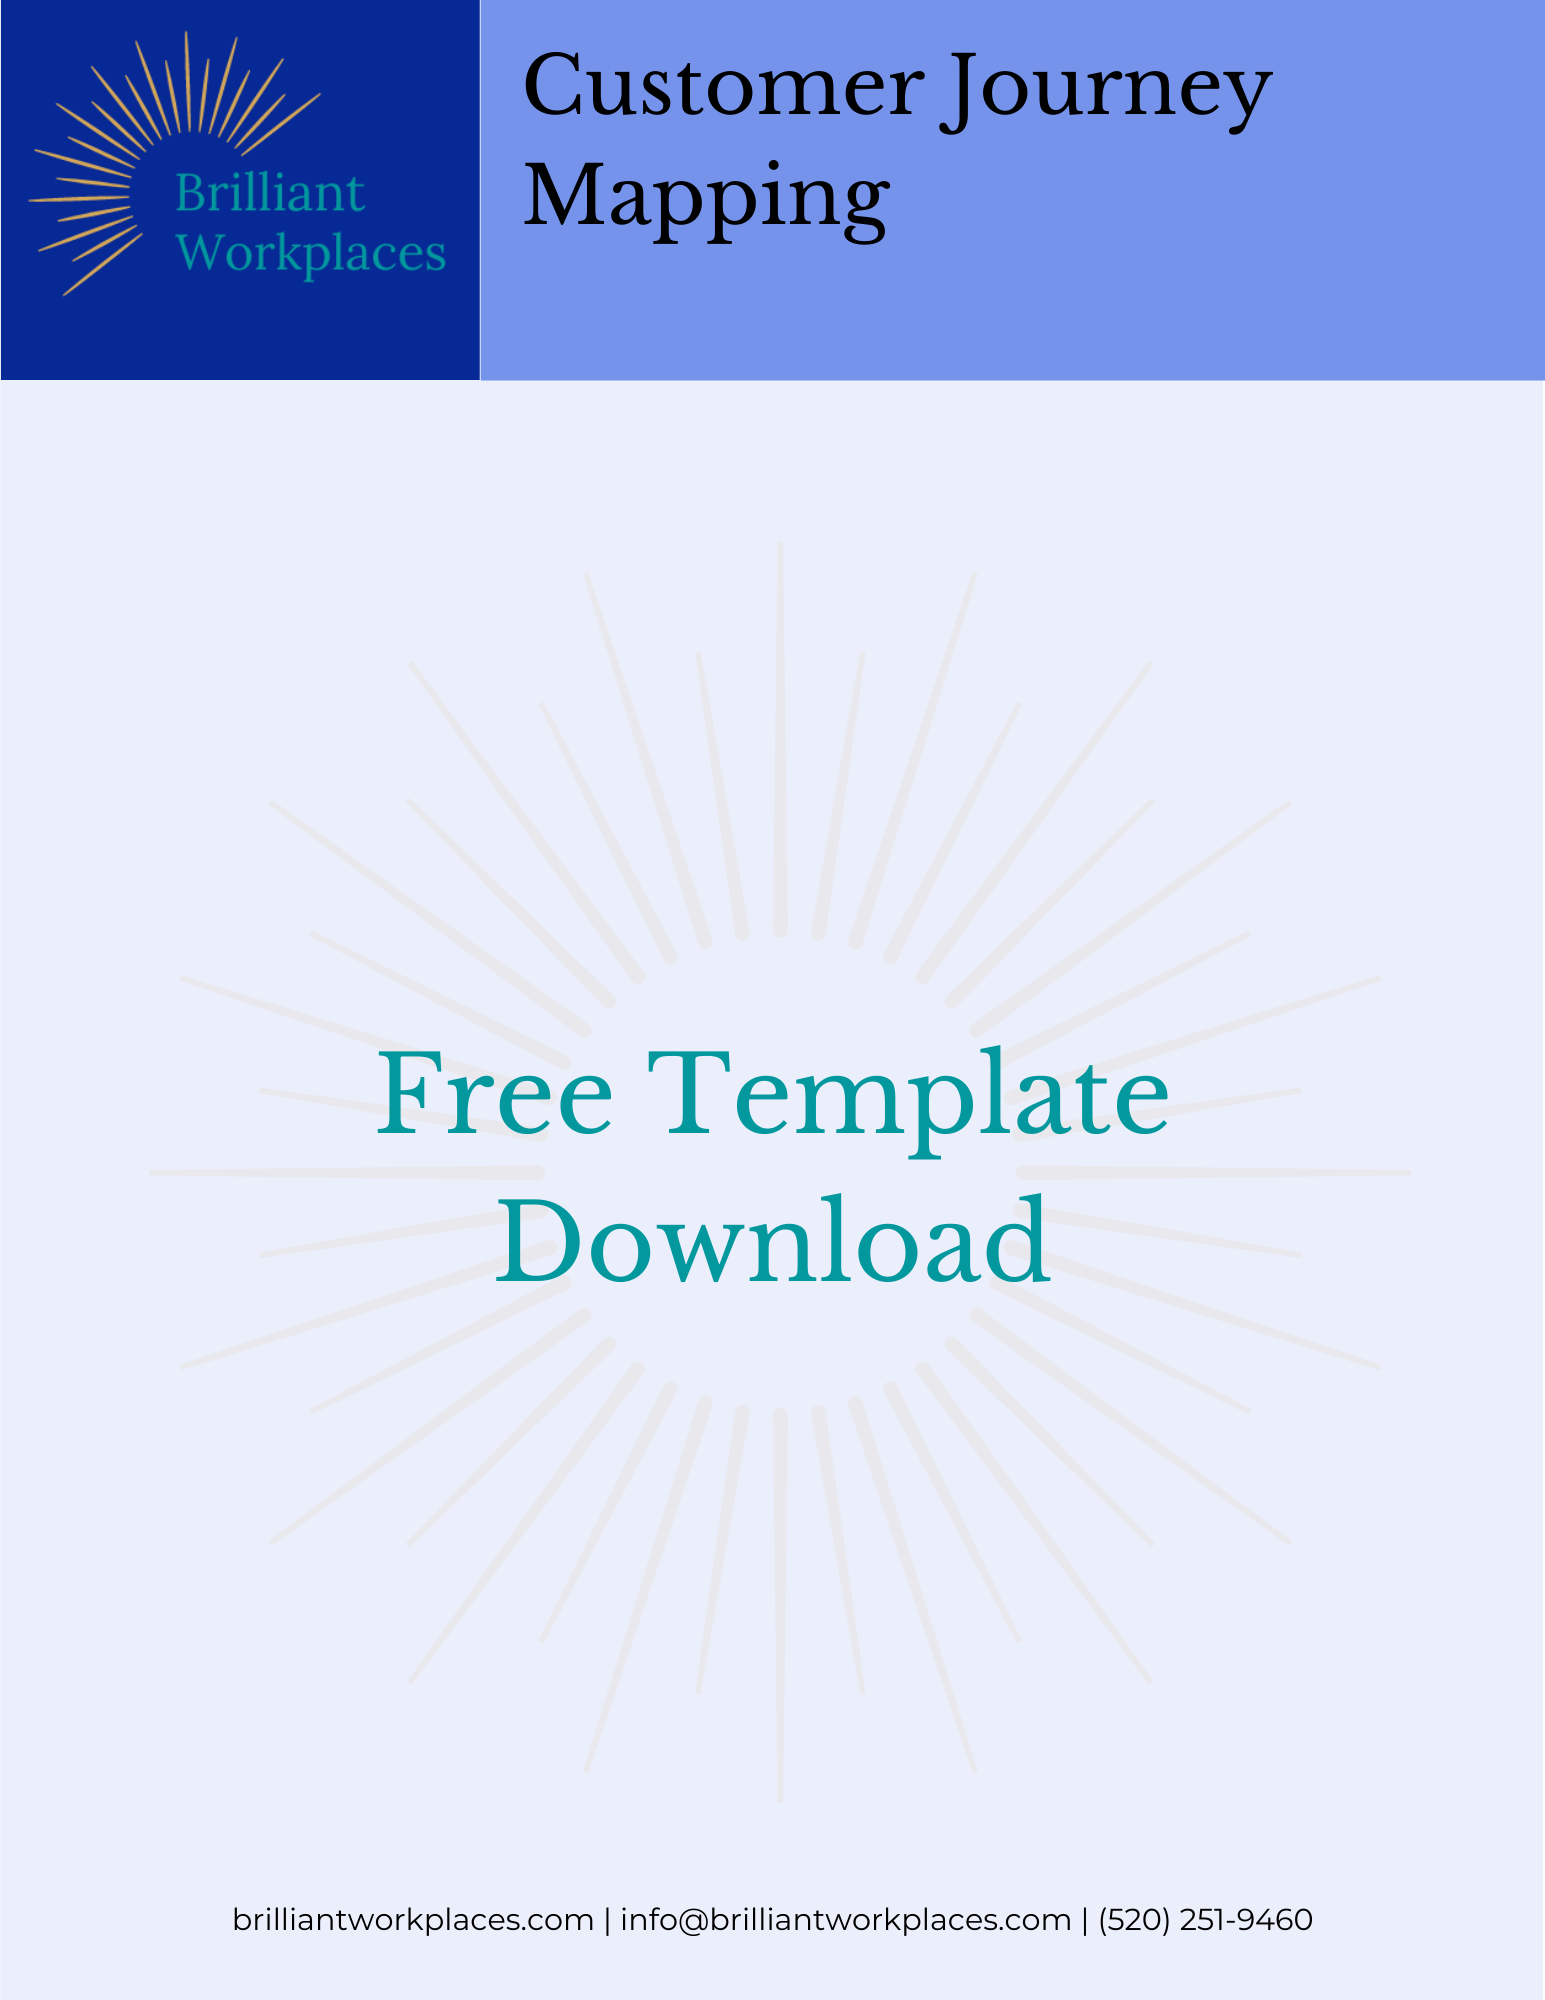 Customer Journey Mapping Free Template Download